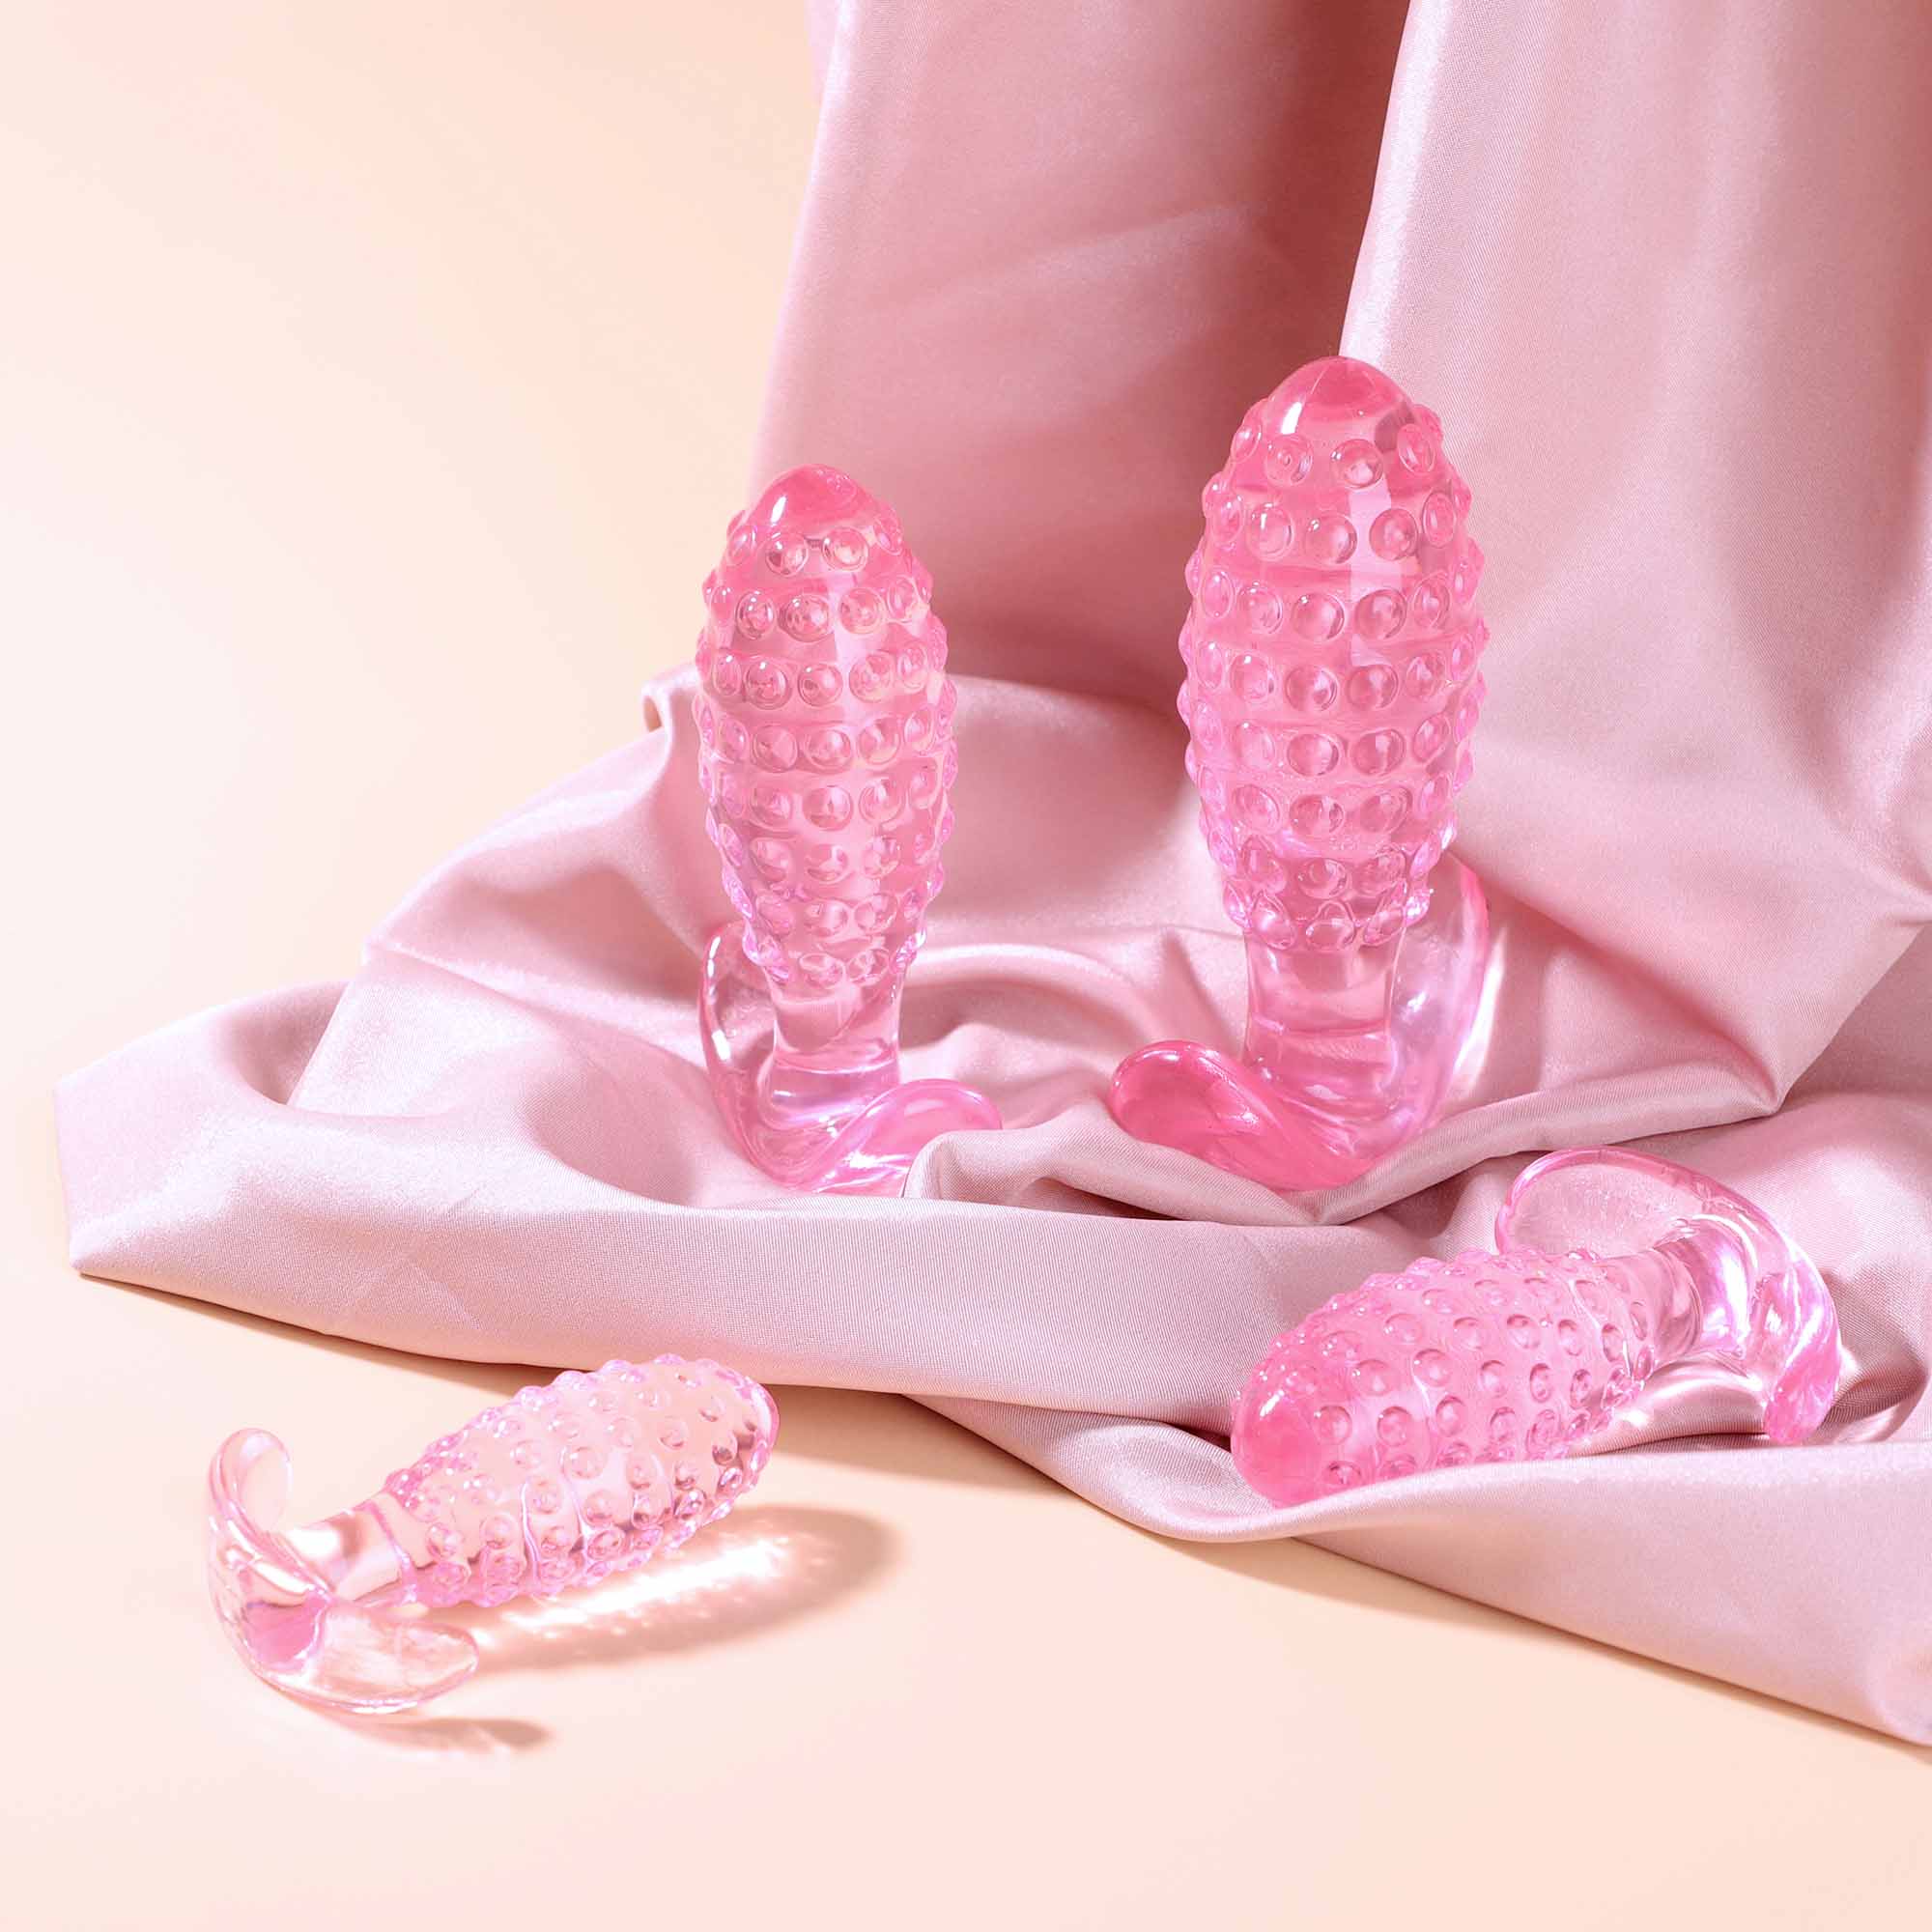 New Pineapple Anal Bead Jelly Anal Plug Particles Stimulate Butt Plug G-spot Prostate Massage Adult Sex Toy For Woman - 1